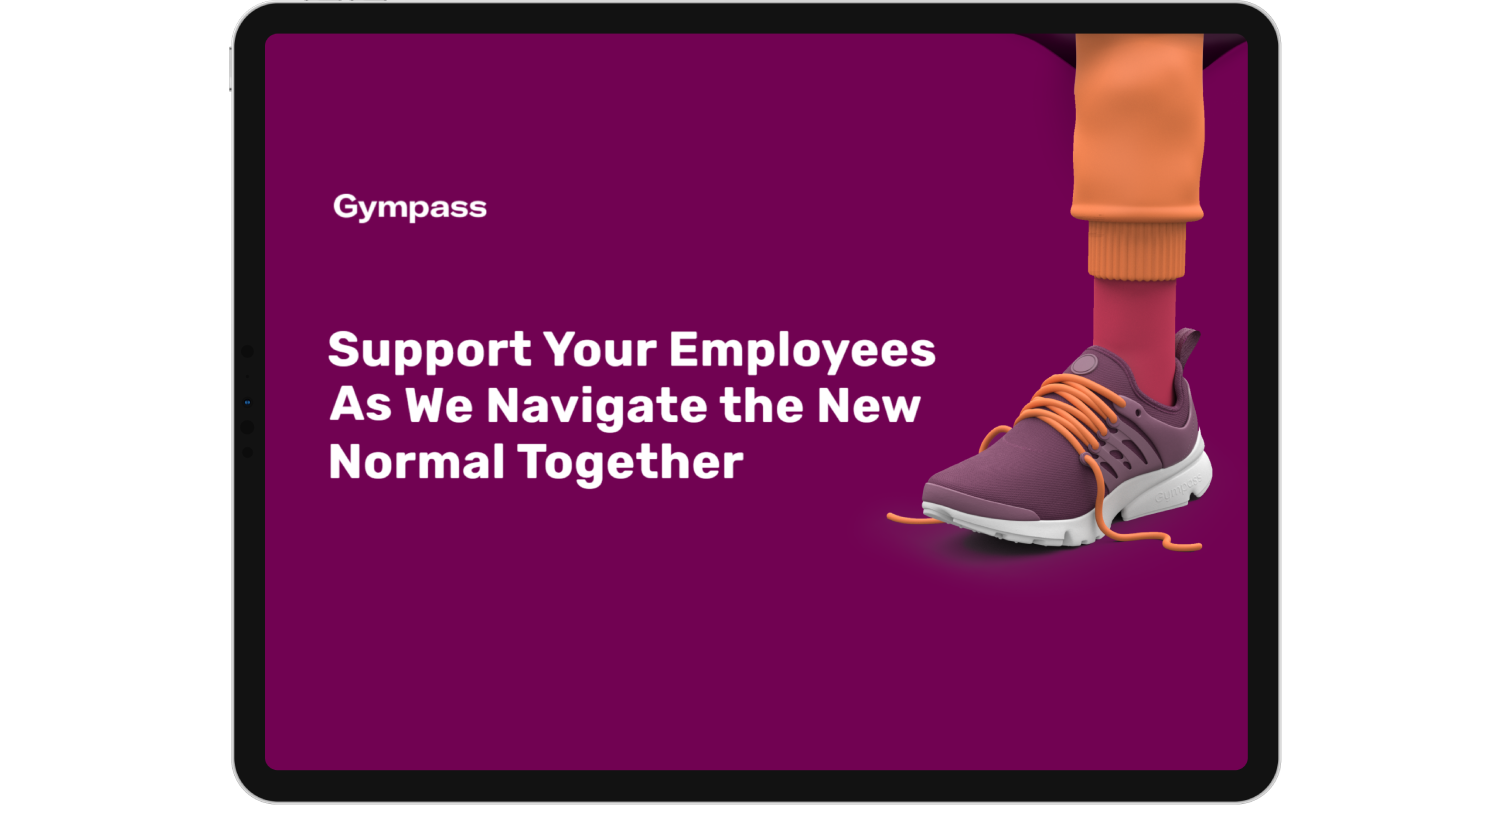 Support Your Employees As We Navigate the New Normal Together